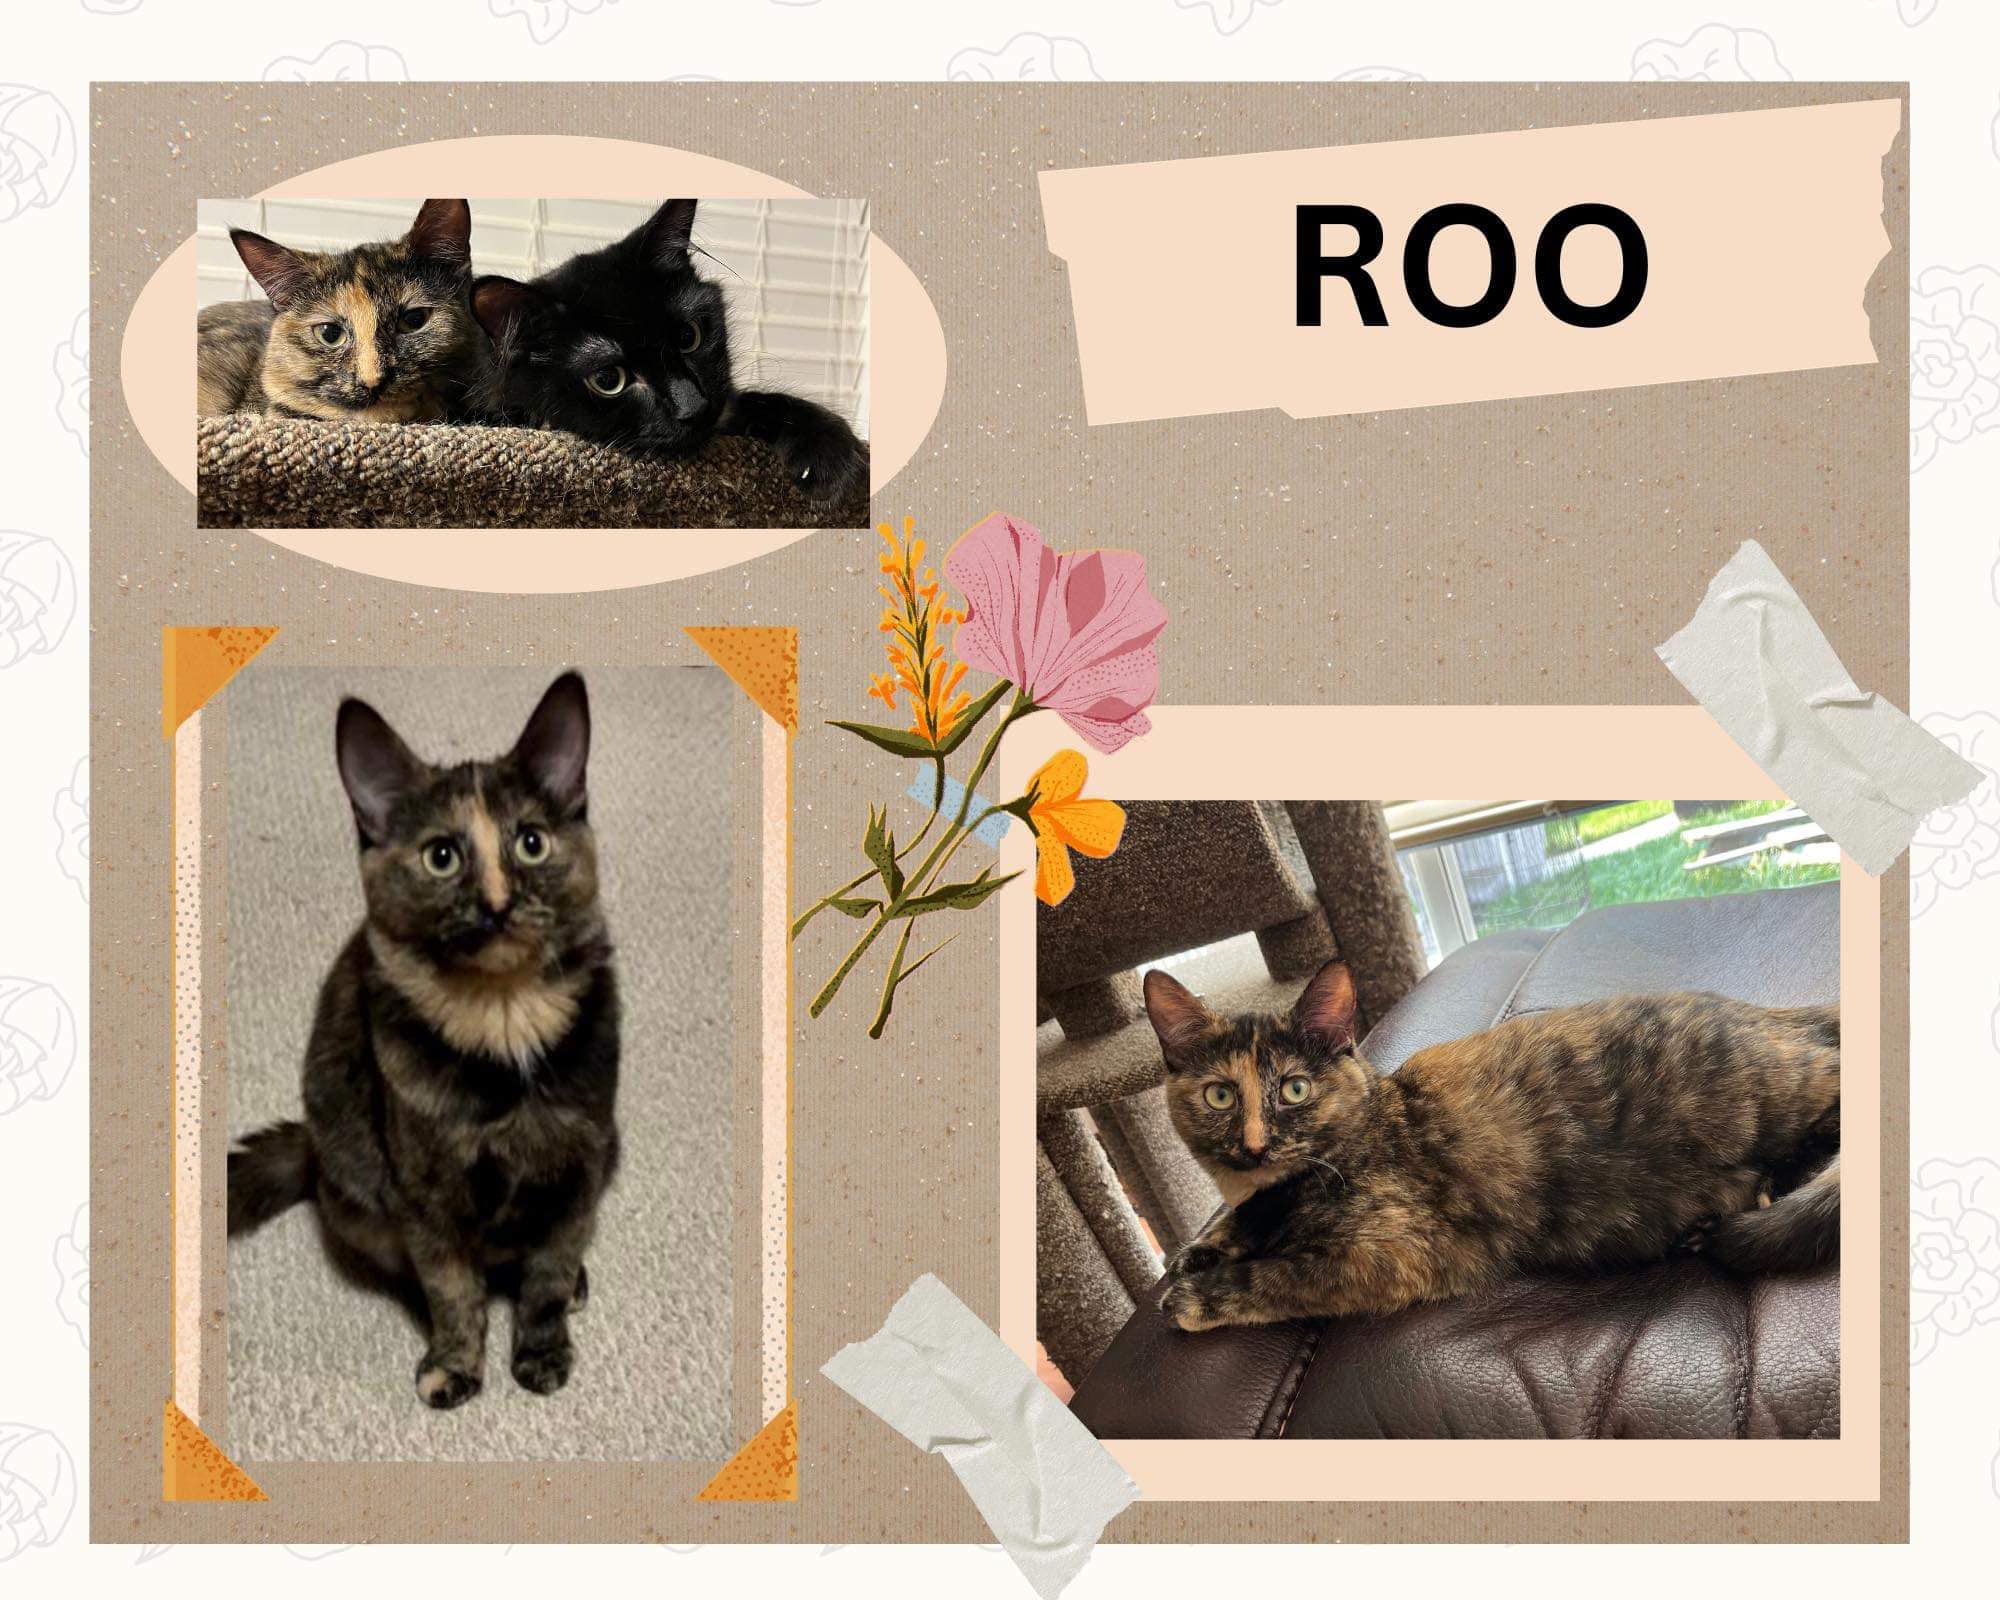 adorable calico cat named Roo for adoption yeg